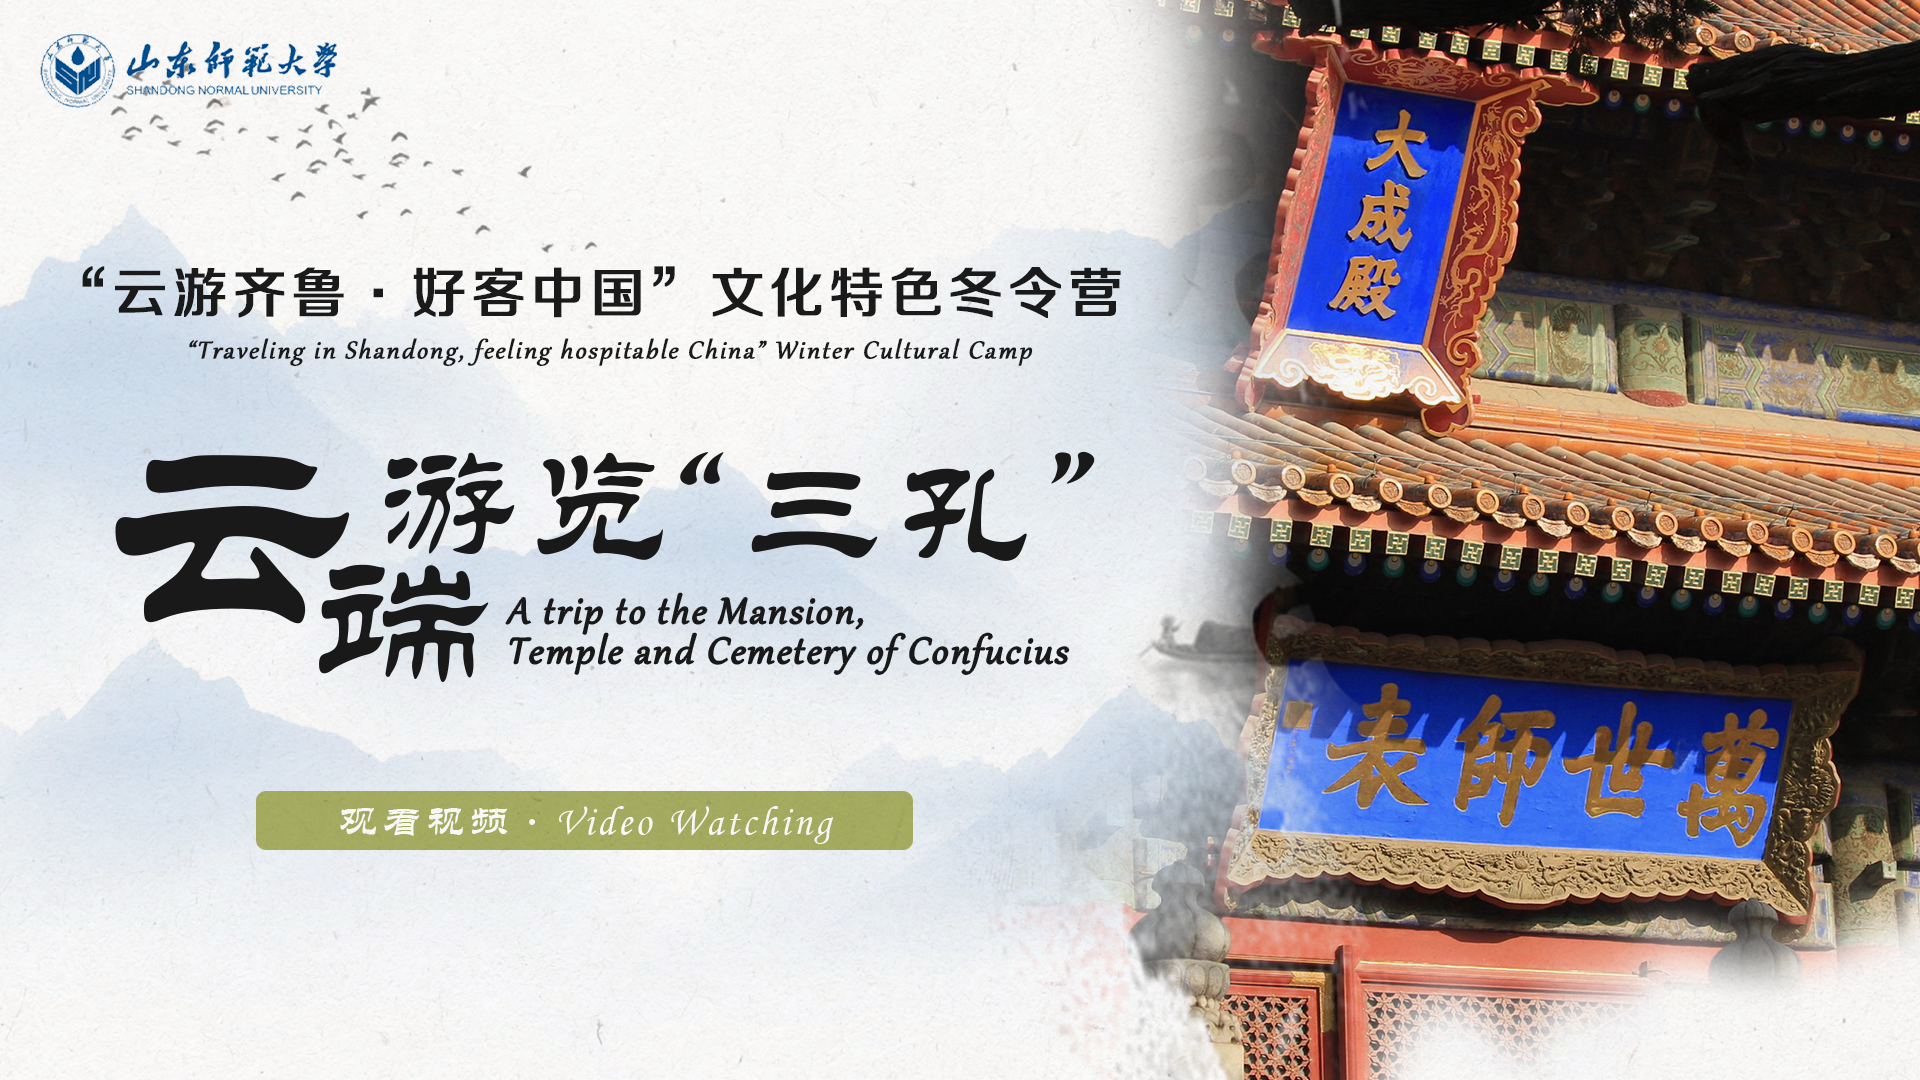 A trip to the Mansion, Temple and Cemetery of Confucius